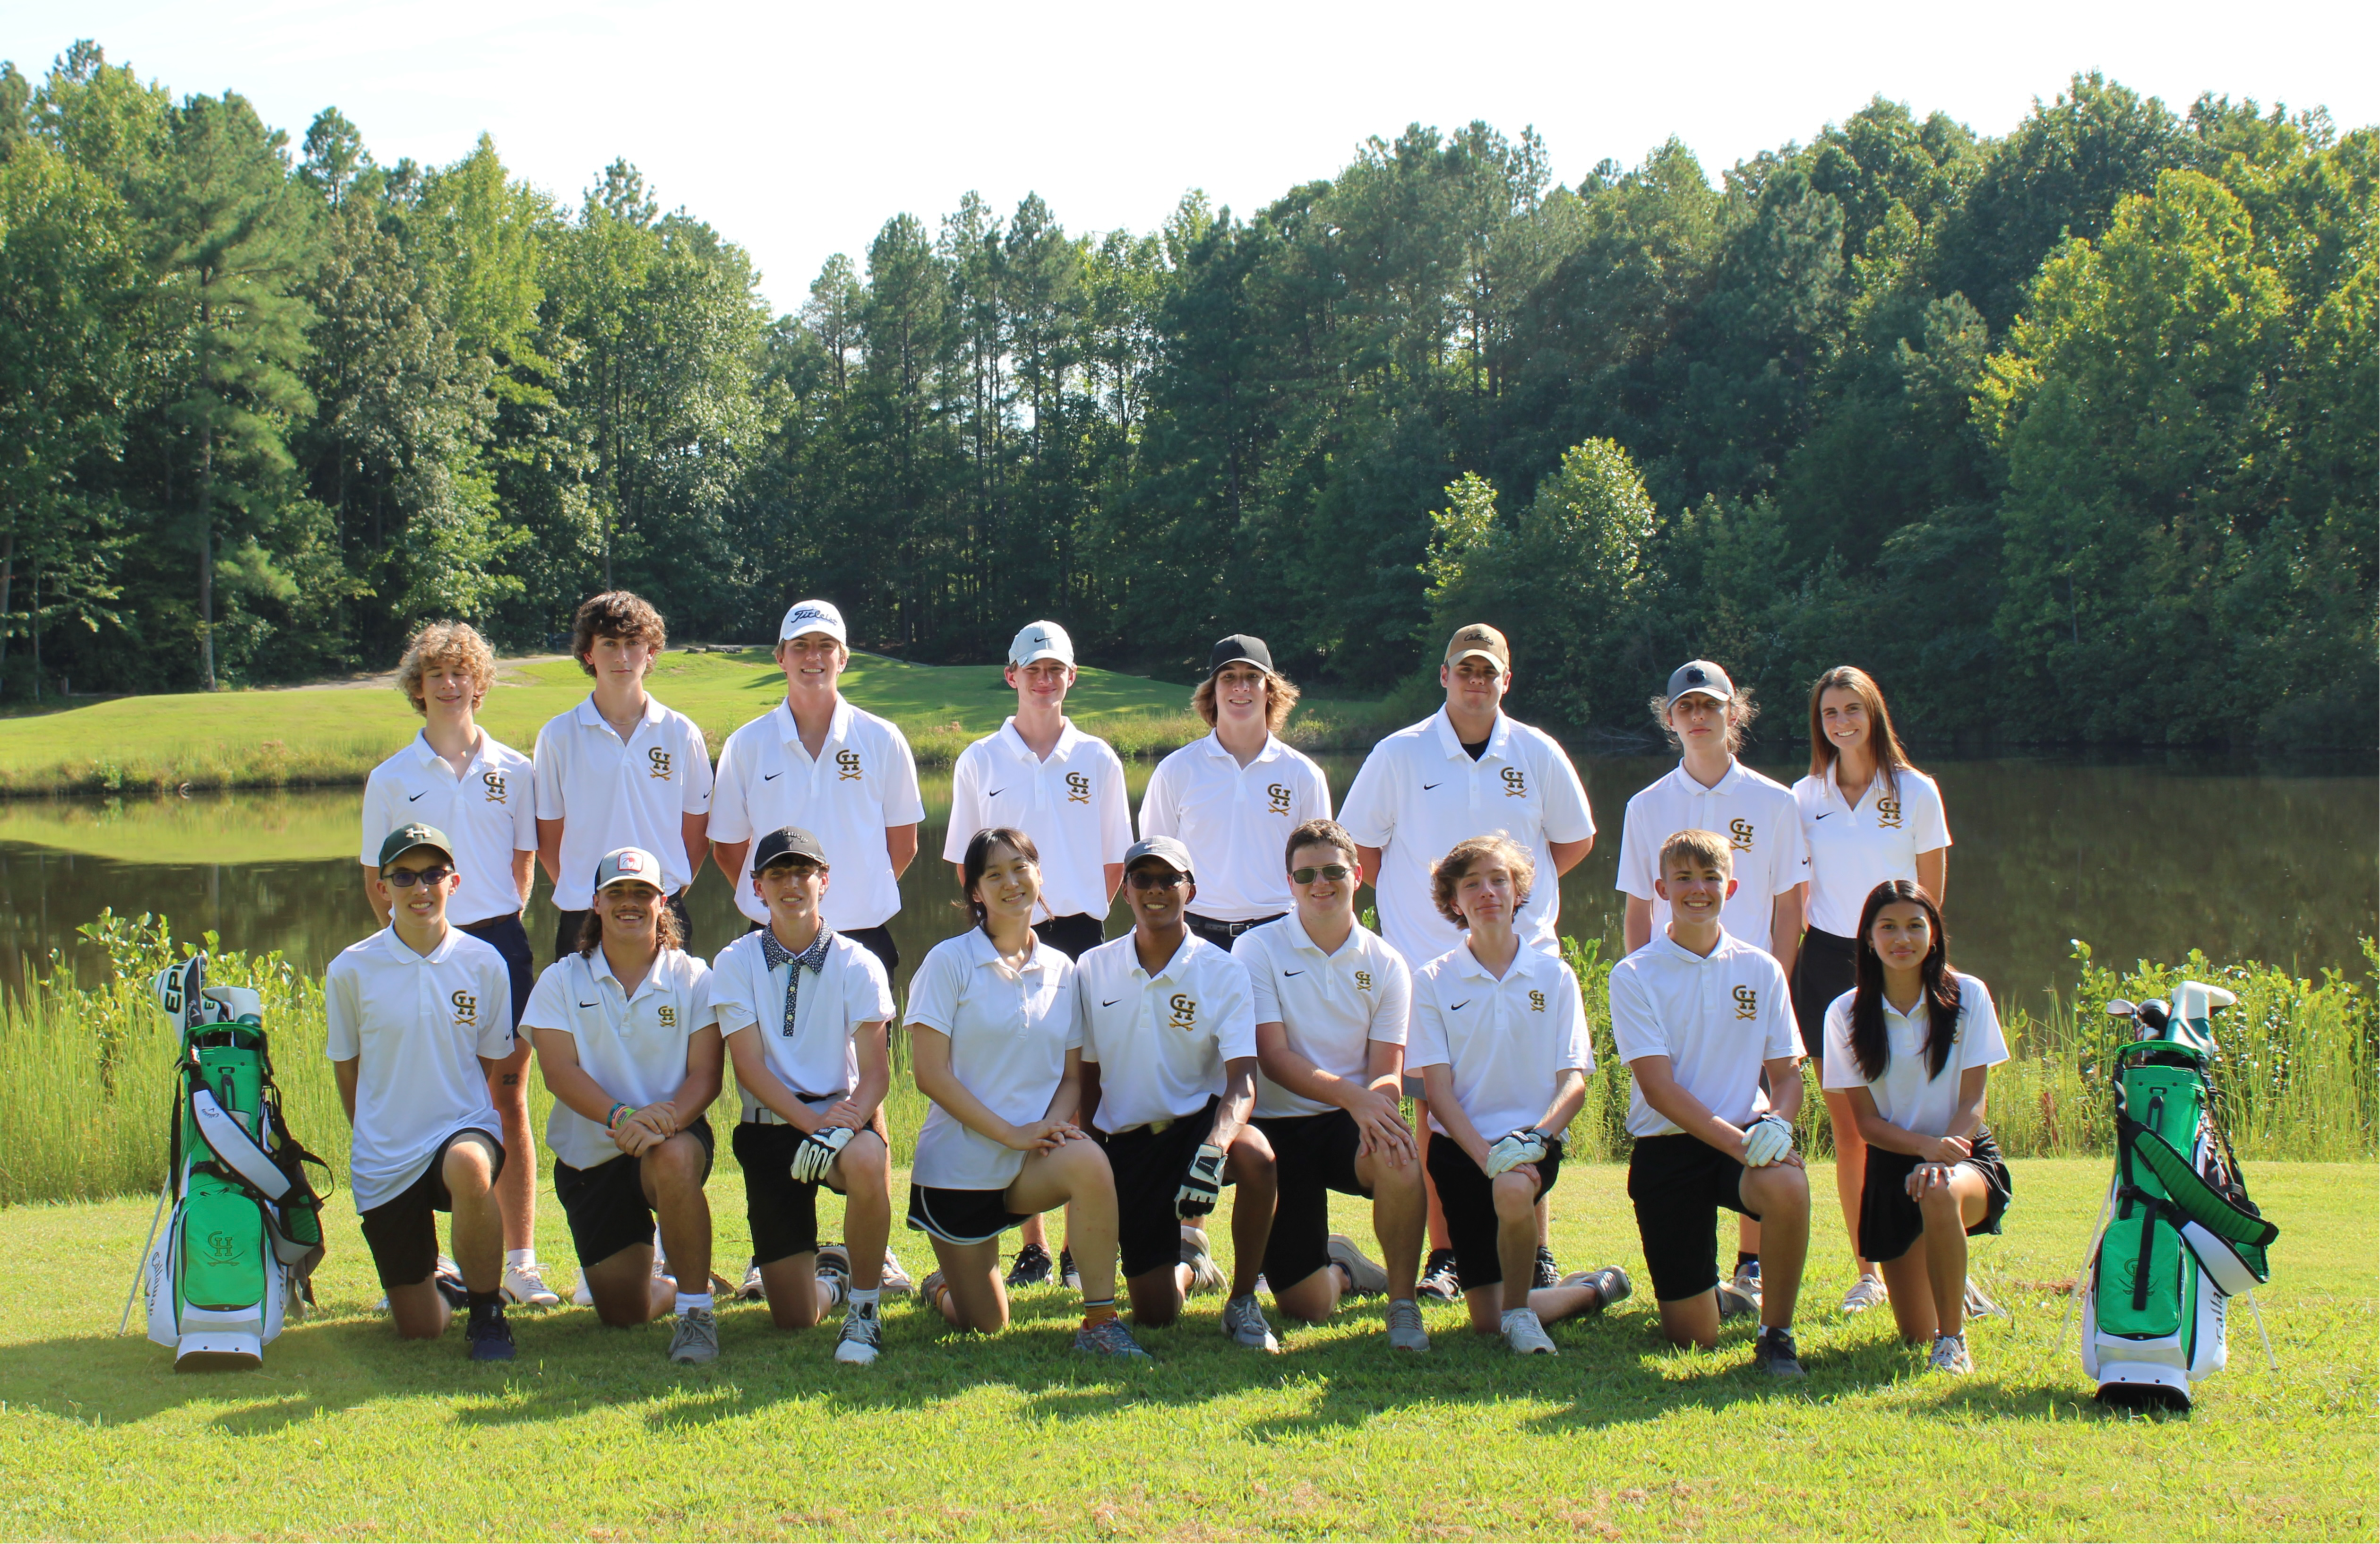 The Clover Hill High School golf team posing for a picture outside